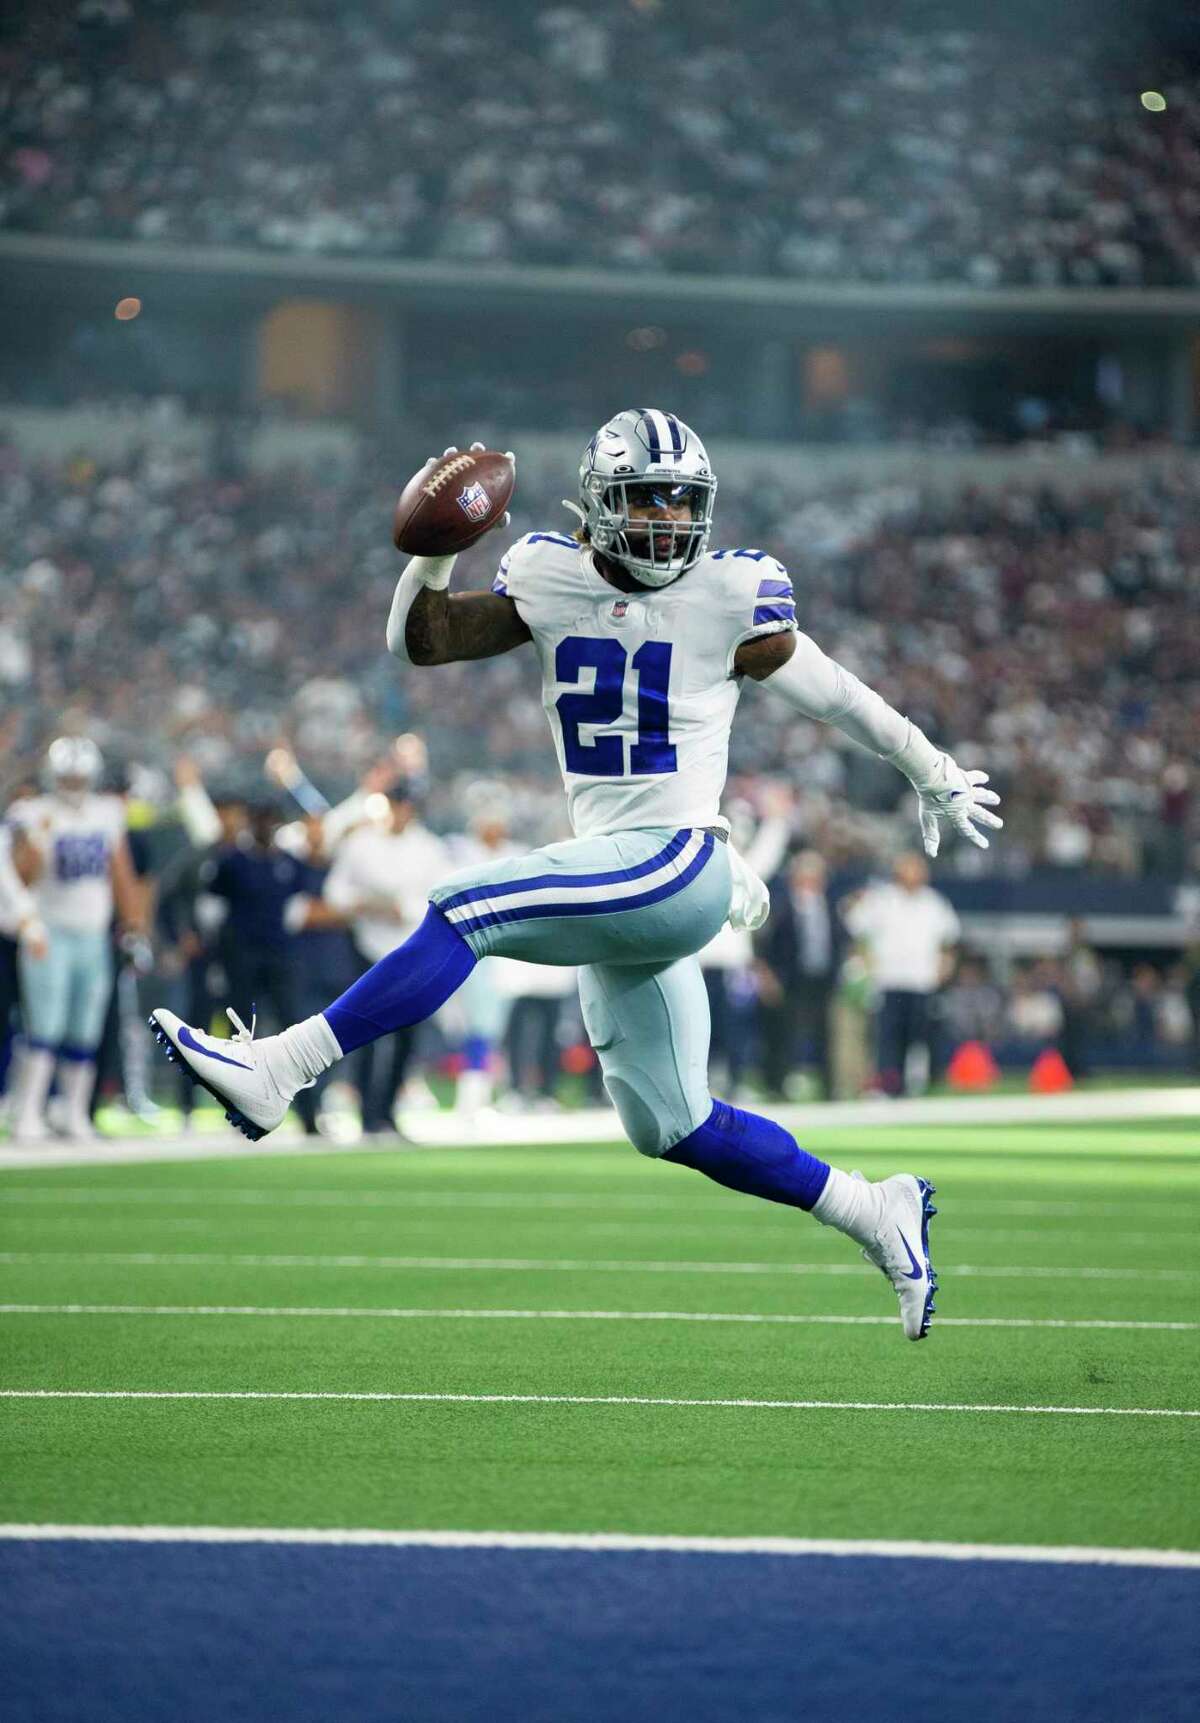 Cowboys running back Ezekiel Elliott rushed for 110 yards and scored on this 13-yard touchdown run in the third quarter.